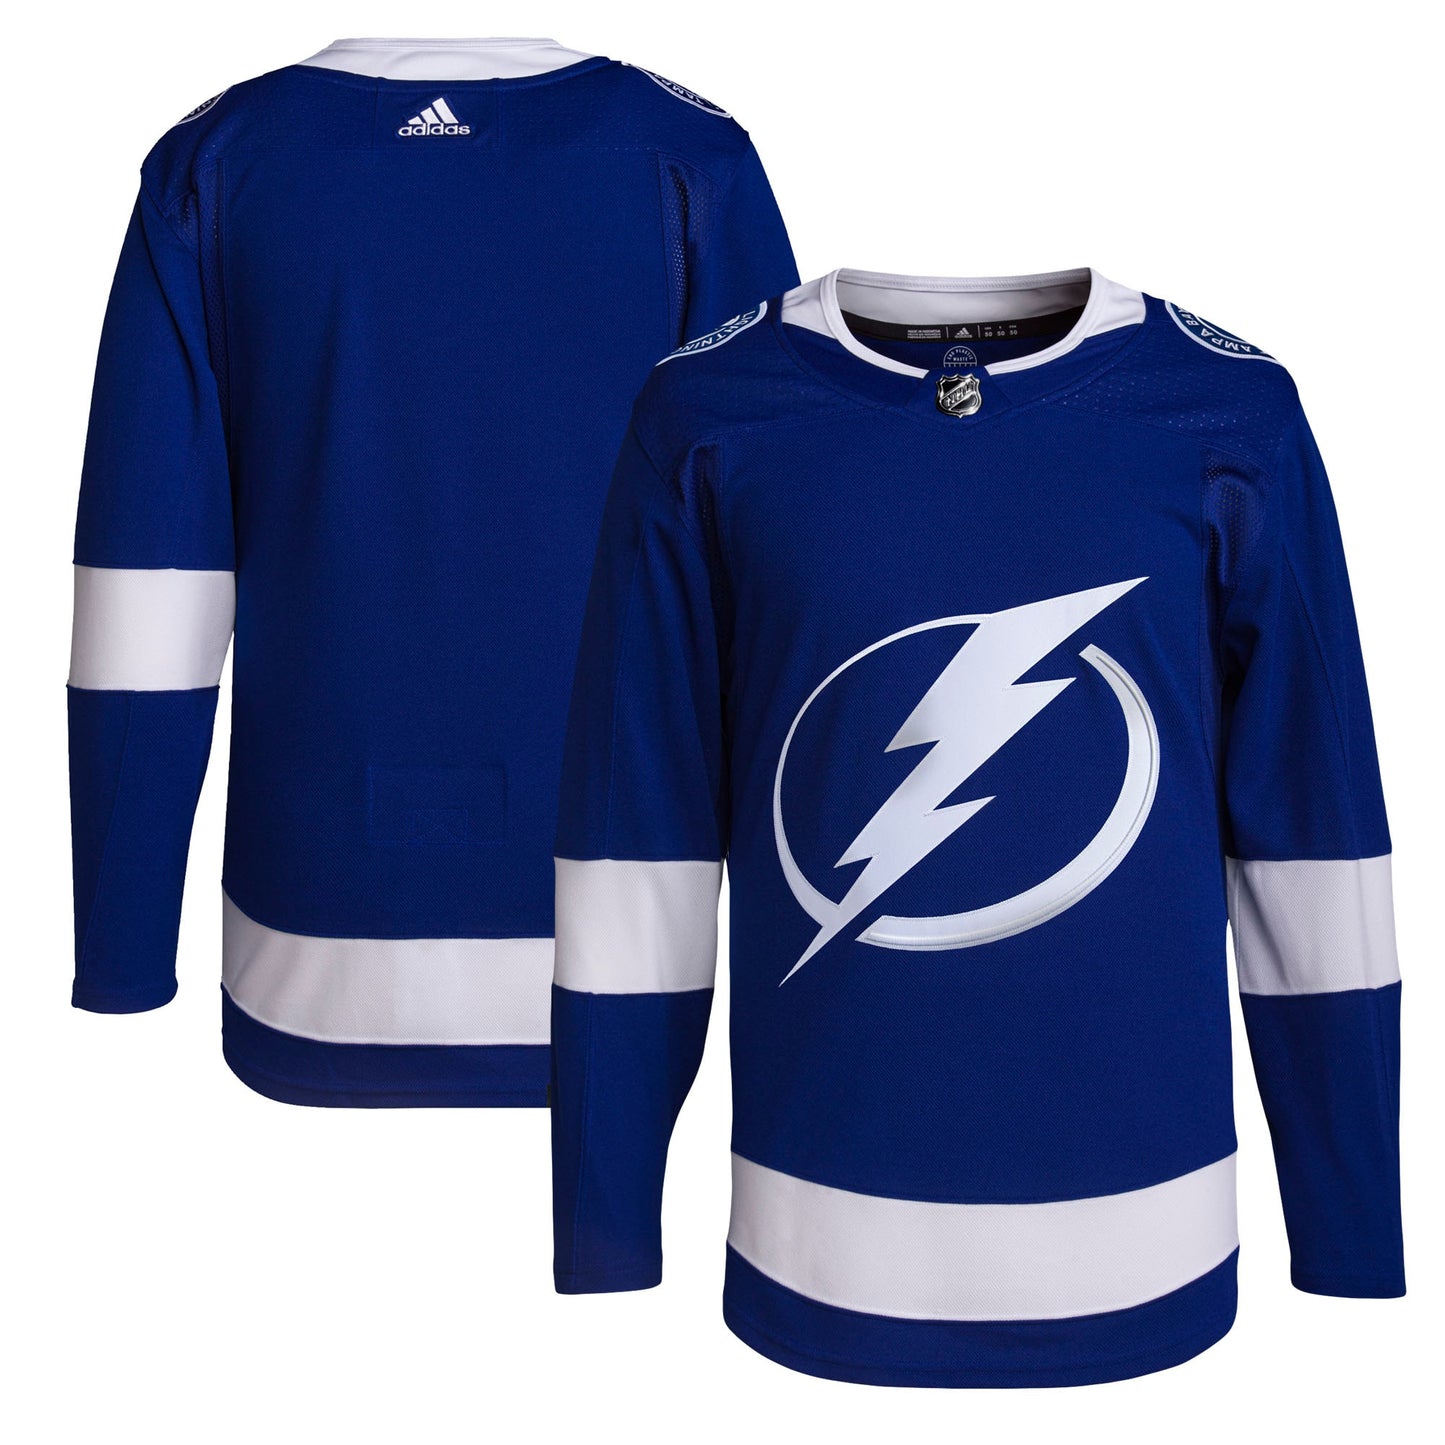 Tampa Bay Lightning adidas Home Primegreen Authentic Pro Jersey - Royal